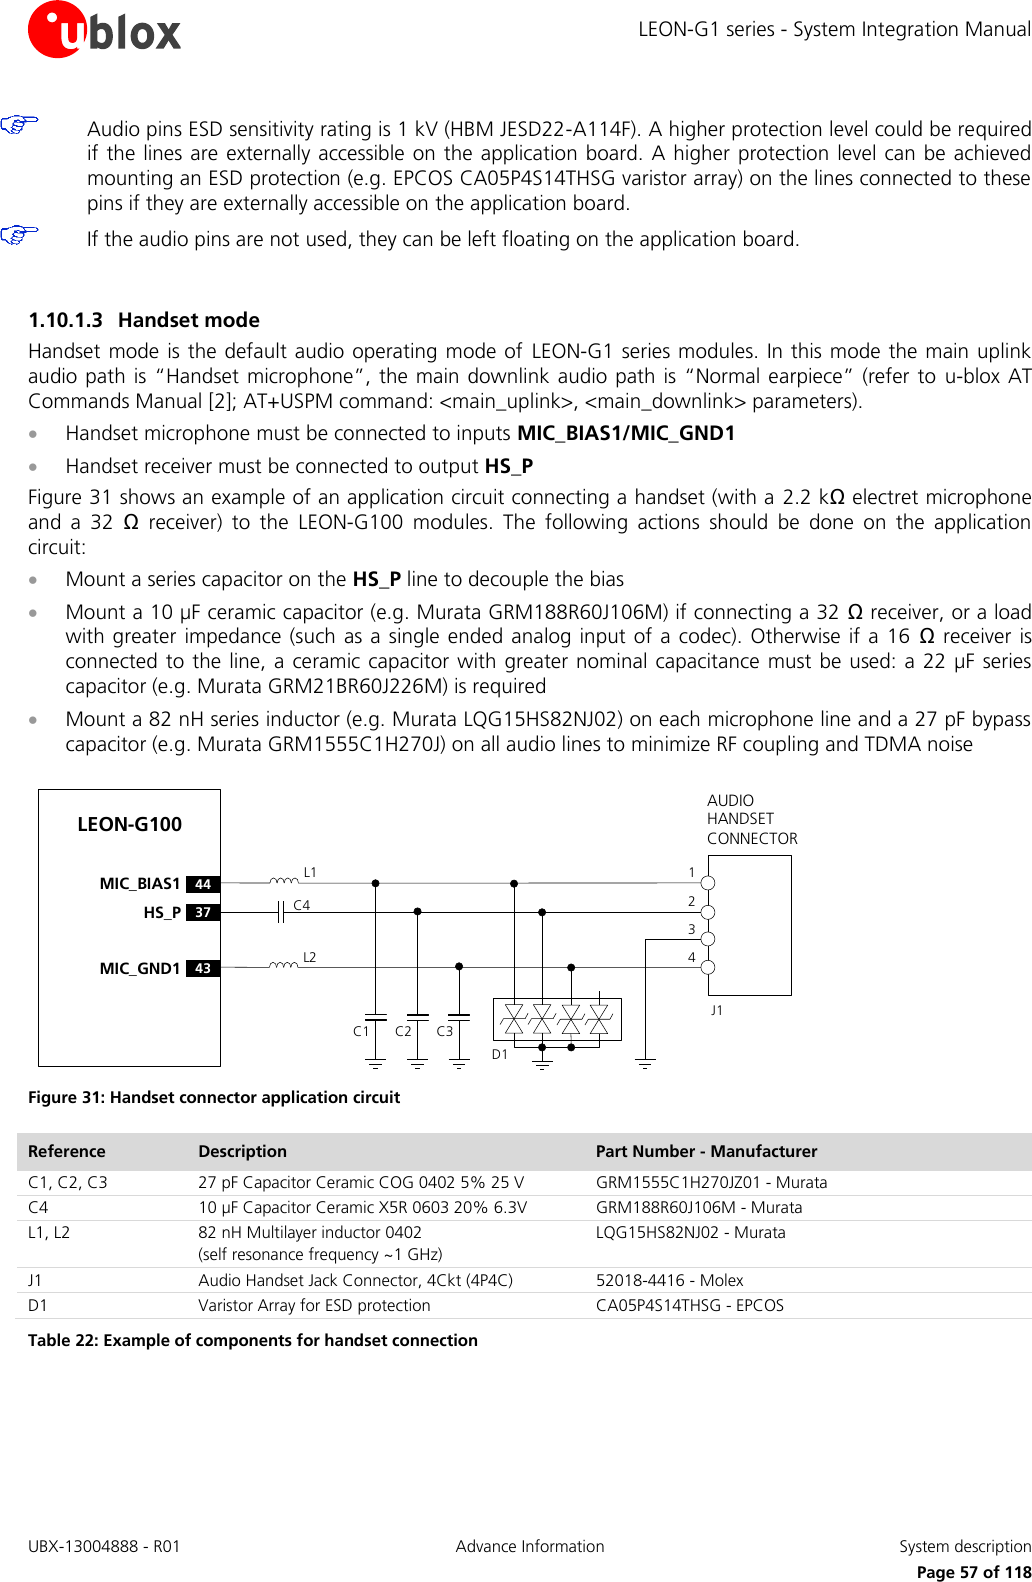 LEON-G1 series - System Integration Manual UBX-13004888 - R01  Advance Information  System description      Page 57 of 118  Audio pins ESD sensitivity rating is 1 kV (HBM JESD22-A114F). A higher protection level could be required if the lines are externally accessible on the application board.  A higher protection level can be achieved mounting an ESD protection (e.g. EPCOS CA05P4S14THSG varistor array) on the lines connected to these pins if they are externally accessible on the application board.  If the audio pins are not used, they can be left floating on the application board.  1.10.1.3 Handset mode Handset mode is the default audio operating mode of  LEON-G1 series modules. In this mode the main uplink audio path is “Handset microphone”,  the main downlink audio path  is “Normal earpiece”  (refer to  u-blox AT Commands Manual [2]; AT+USPM command: &lt;main_uplink&gt;, &lt;main_downlink&gt; parameters).  Handset microphone must be connected to inputs MIC_BIAS1/MIC_GND1  Handset receiver must be connected to output HS_P Figure 31 shows an example of an application circuit connecting a handset (with a 2.2 kΩ electret microphone and  a  32  Ω  receiver)  to  the  LEON-G100  modules.  The  following  actions  should  be  done  on  the  application circuit:  Mount a series capacitor on the HS_P line to decouple the bias  Mount a 10 µF ceramic capacitor (e.g. Murata GRM188R60J106M) if connecting a 32 Ω receiver, or a load with greater impedance (such as a single ended analog input of a  codec). Otherwise  if a 16  Ω  receiver is connected to the line, a  ceramic capacitor with greater nominal capacitance must be used: a 22 µF  series capacitor (e.g. Murata GRM21BR60J226M) is required  Mount a 82 nH series inductor (e.g. Murata LQG15HS82NJ02) on each microphone line and a 27 pF bypass capacitor (e.g. Murata GRM1555C1H270J) on all audio lines to minimize RF coupling and TDMA noise LEON-G100C1AUDIO HANDSET CONNECTORC2 C3J14321L1L237HS_P43MIC_GND144MIC_BIAS1C4D1 Figure 31: Handset connector application circuit Reference Description Part Number - Manufacturer C1, C2, C3 27 pF Capacitor Ceramic COG 0402 5% 25 V  GRM1555C1H270JZ01 - Murata C4 10 µF Capacitor Ceramic X5R 0603 20% 6.3V GRM188R60J106M - Murata L1, L2 82 nH Multilayer inductor 0402 (self resonance frequency ~1 GHz) LQG15HS82NJ02 - Murata J1 Audio Handset Jack Connector, 4Ckt (4P4C) 52018-4416 - Molex  D1 Varistor Array for ESD protection CA05P4S14THSG - EPCOS Table 22: Example of components for handset connection  